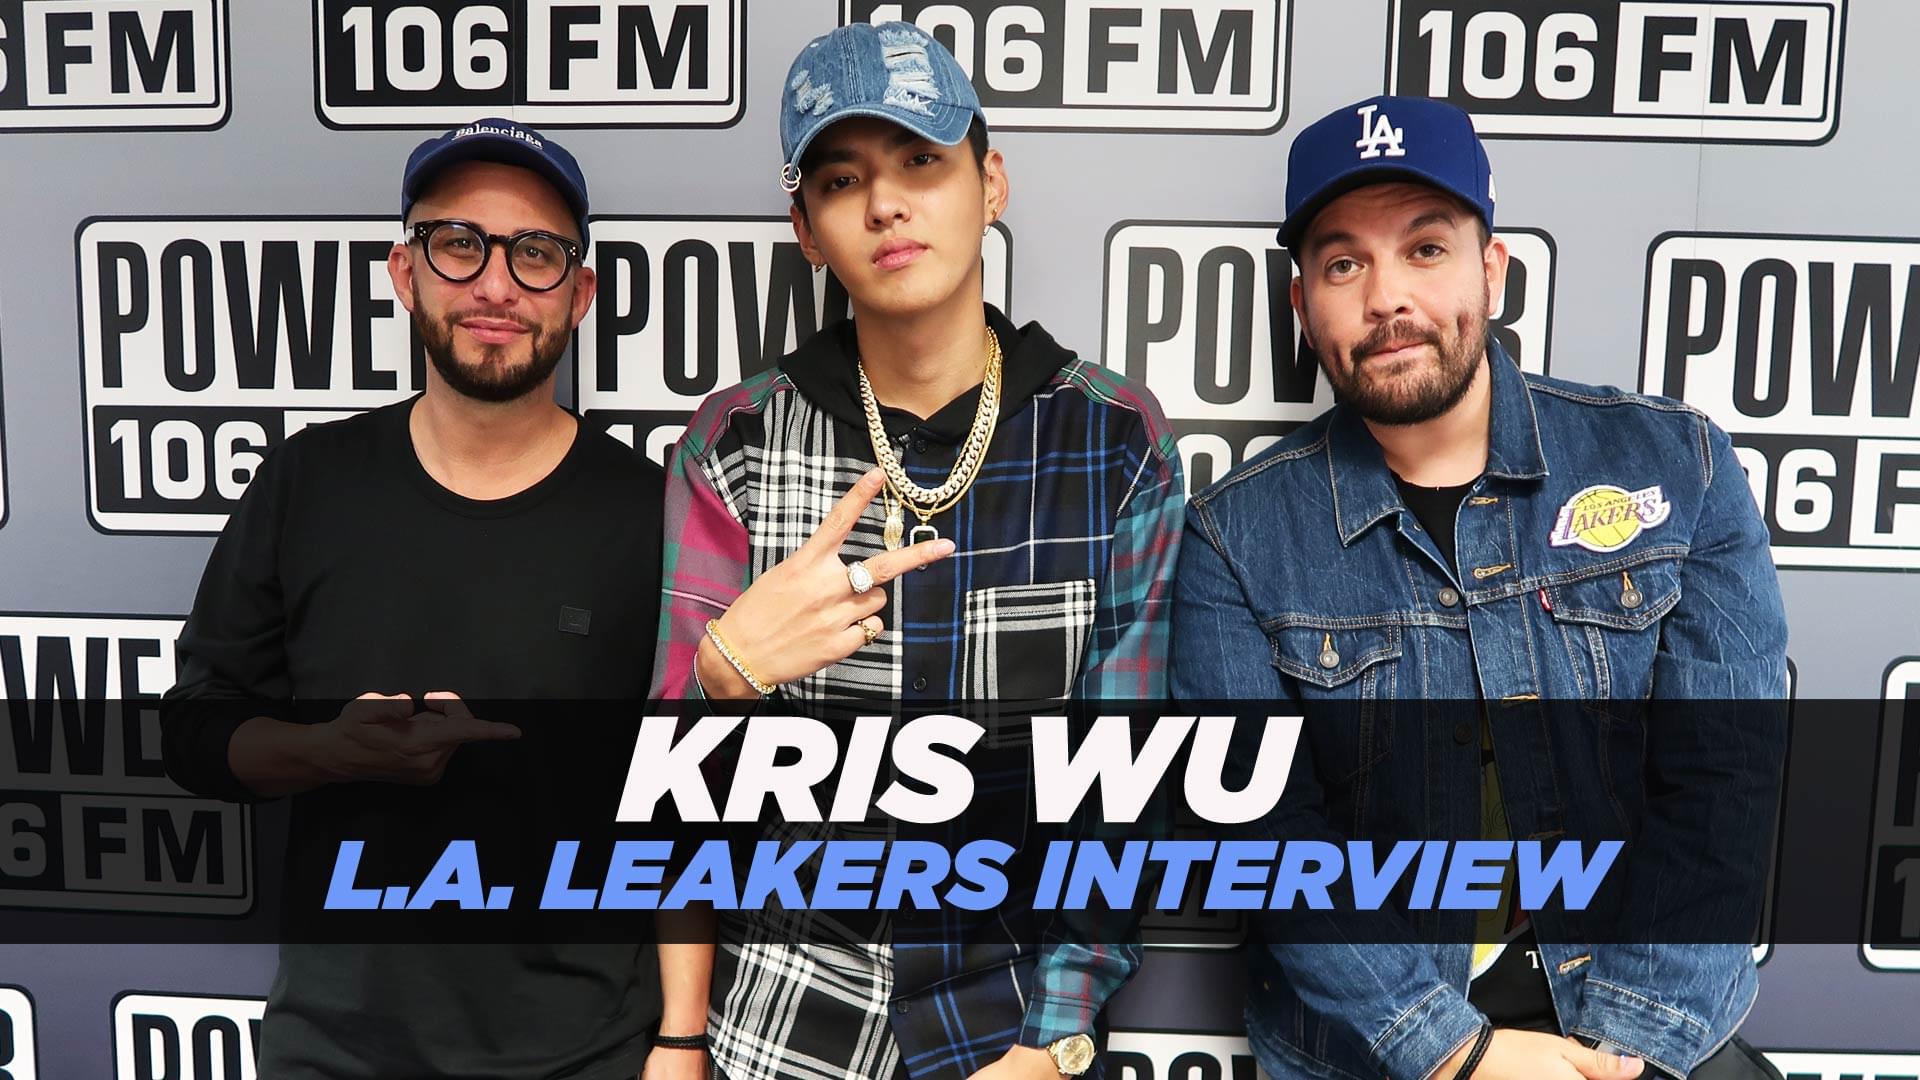 Kris Wu Stops By The Liftoff To Talk With Justin Credible And Dj SourMilk About Working With Pharrell